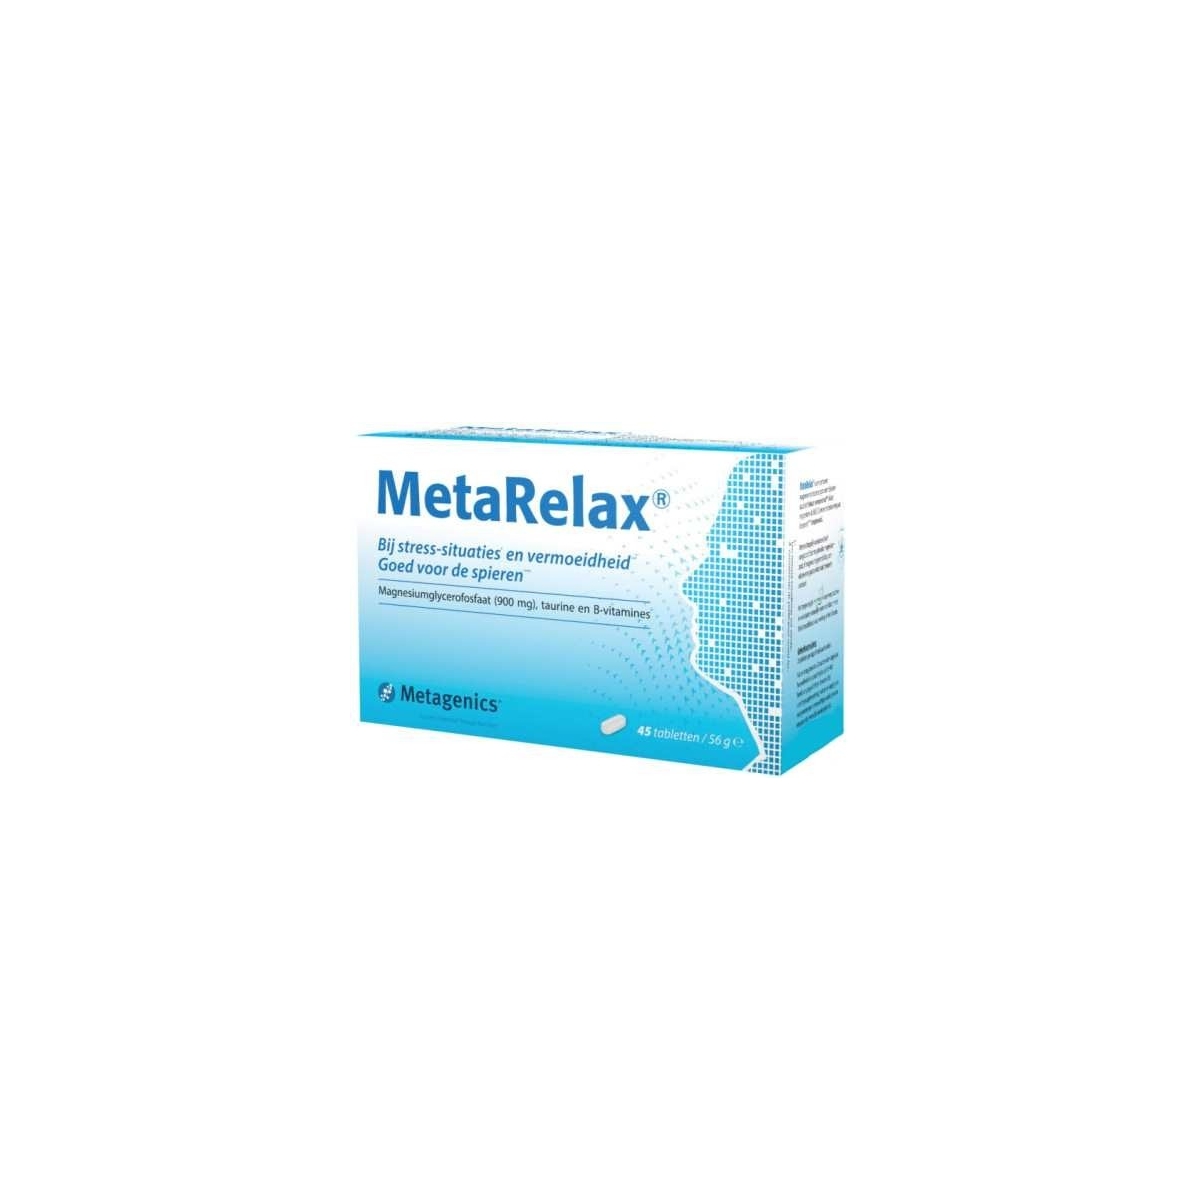 Metagenics Metarelax 45tab - Good prices and fast delivery!